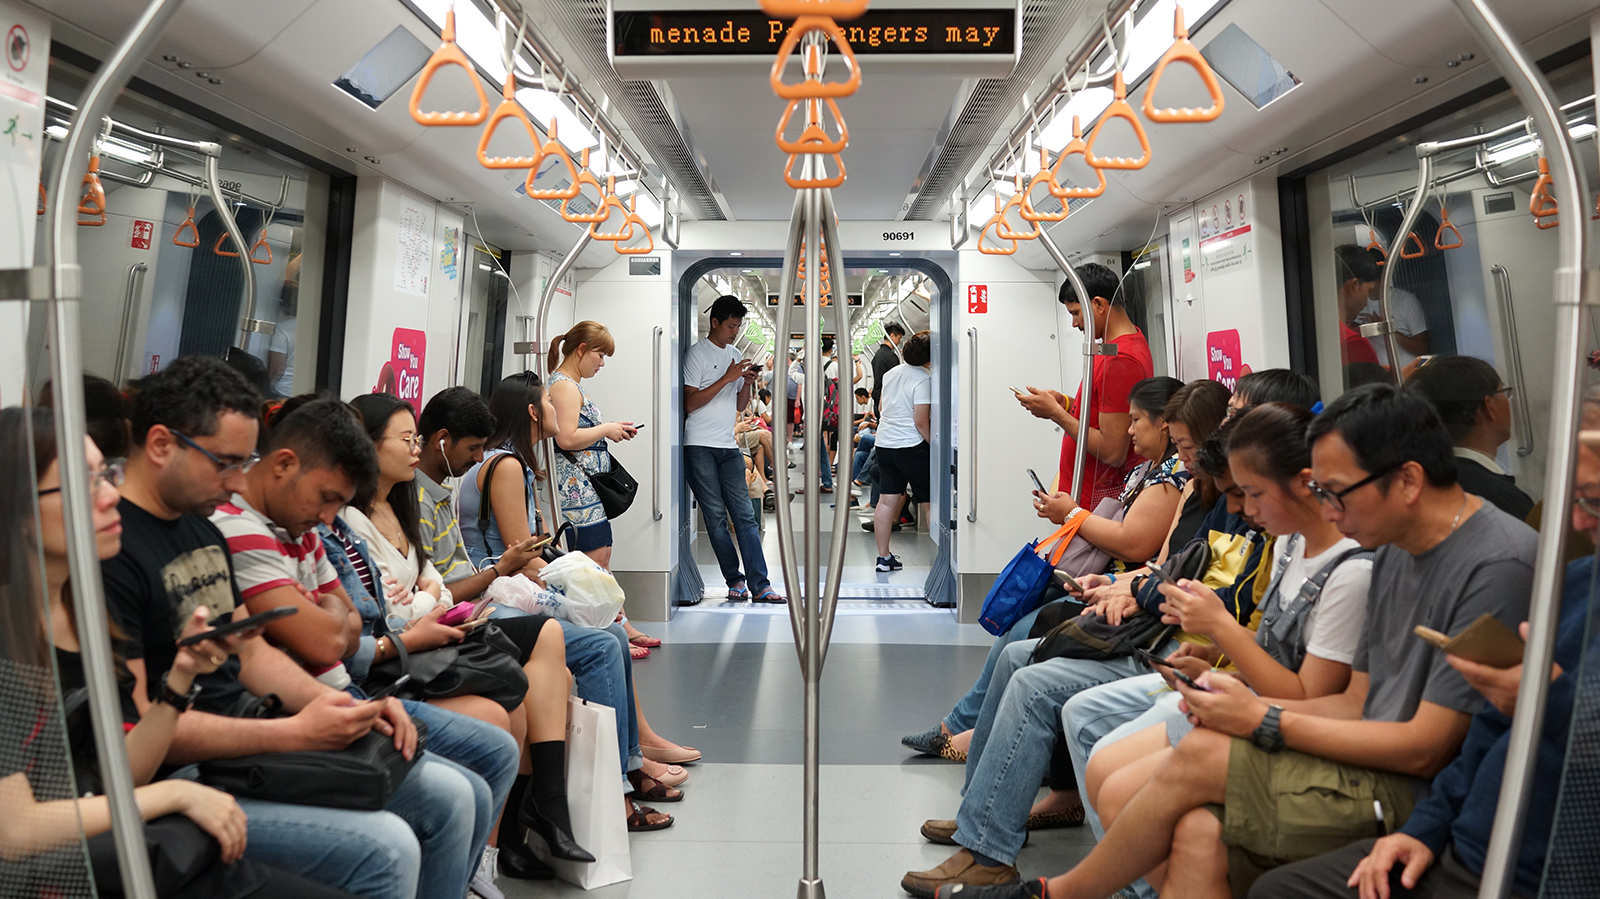 Reddit thread uncovers entitled attitudes of commuters in Singapore